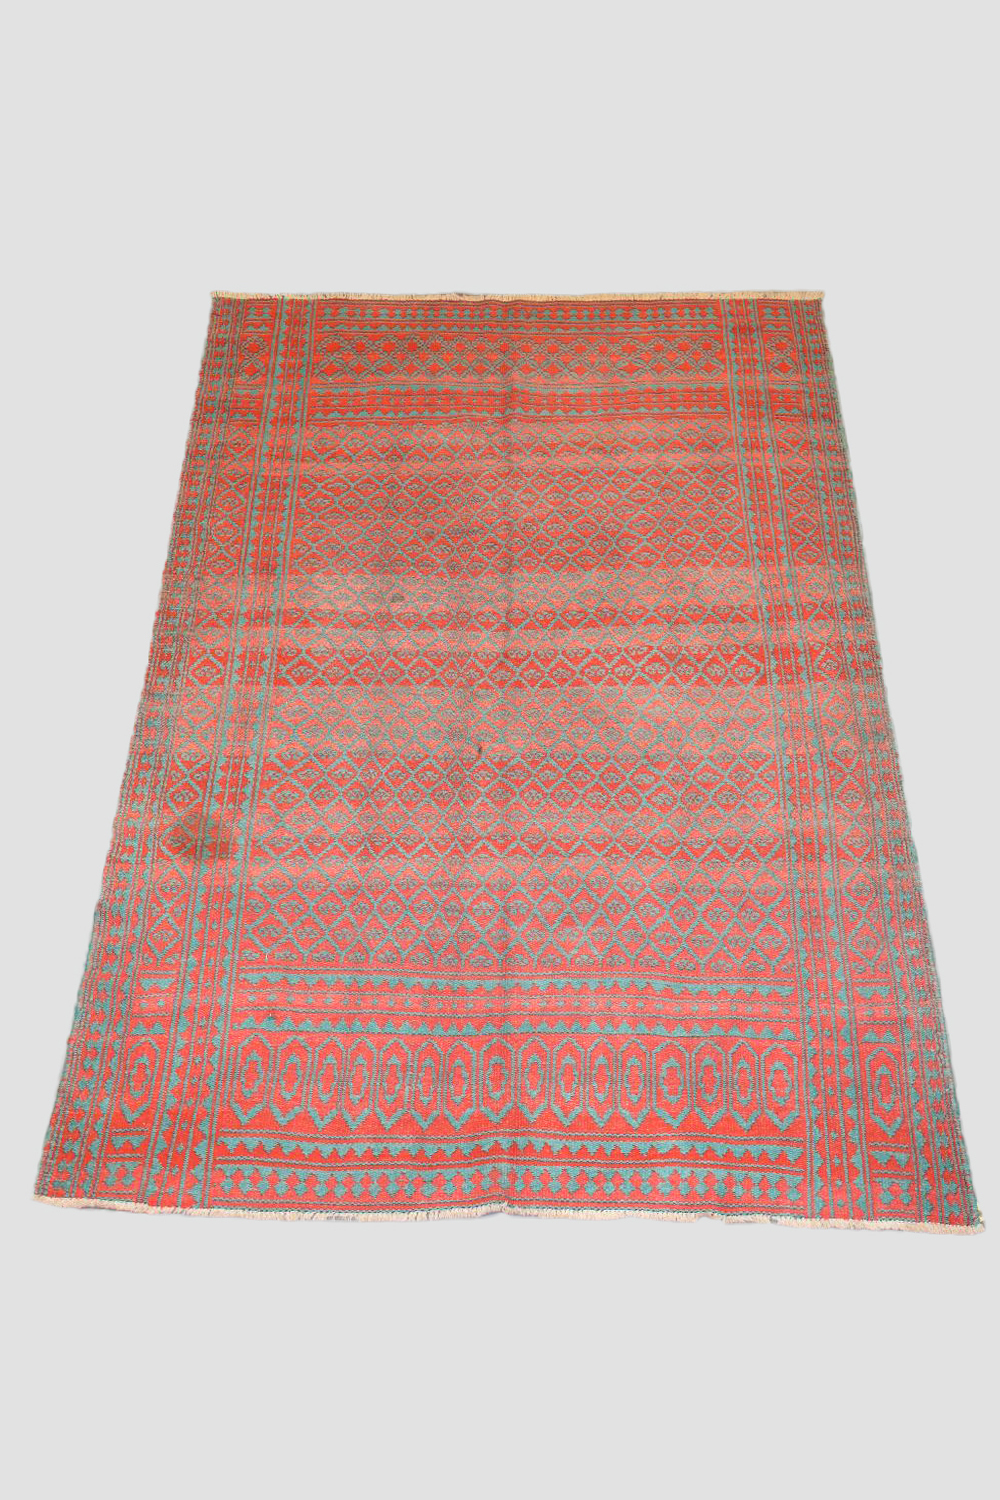 Good Yazd reversible cotton summer flatweave, central Persia, mid-20th century, 8ft. 6in. X 5ft.